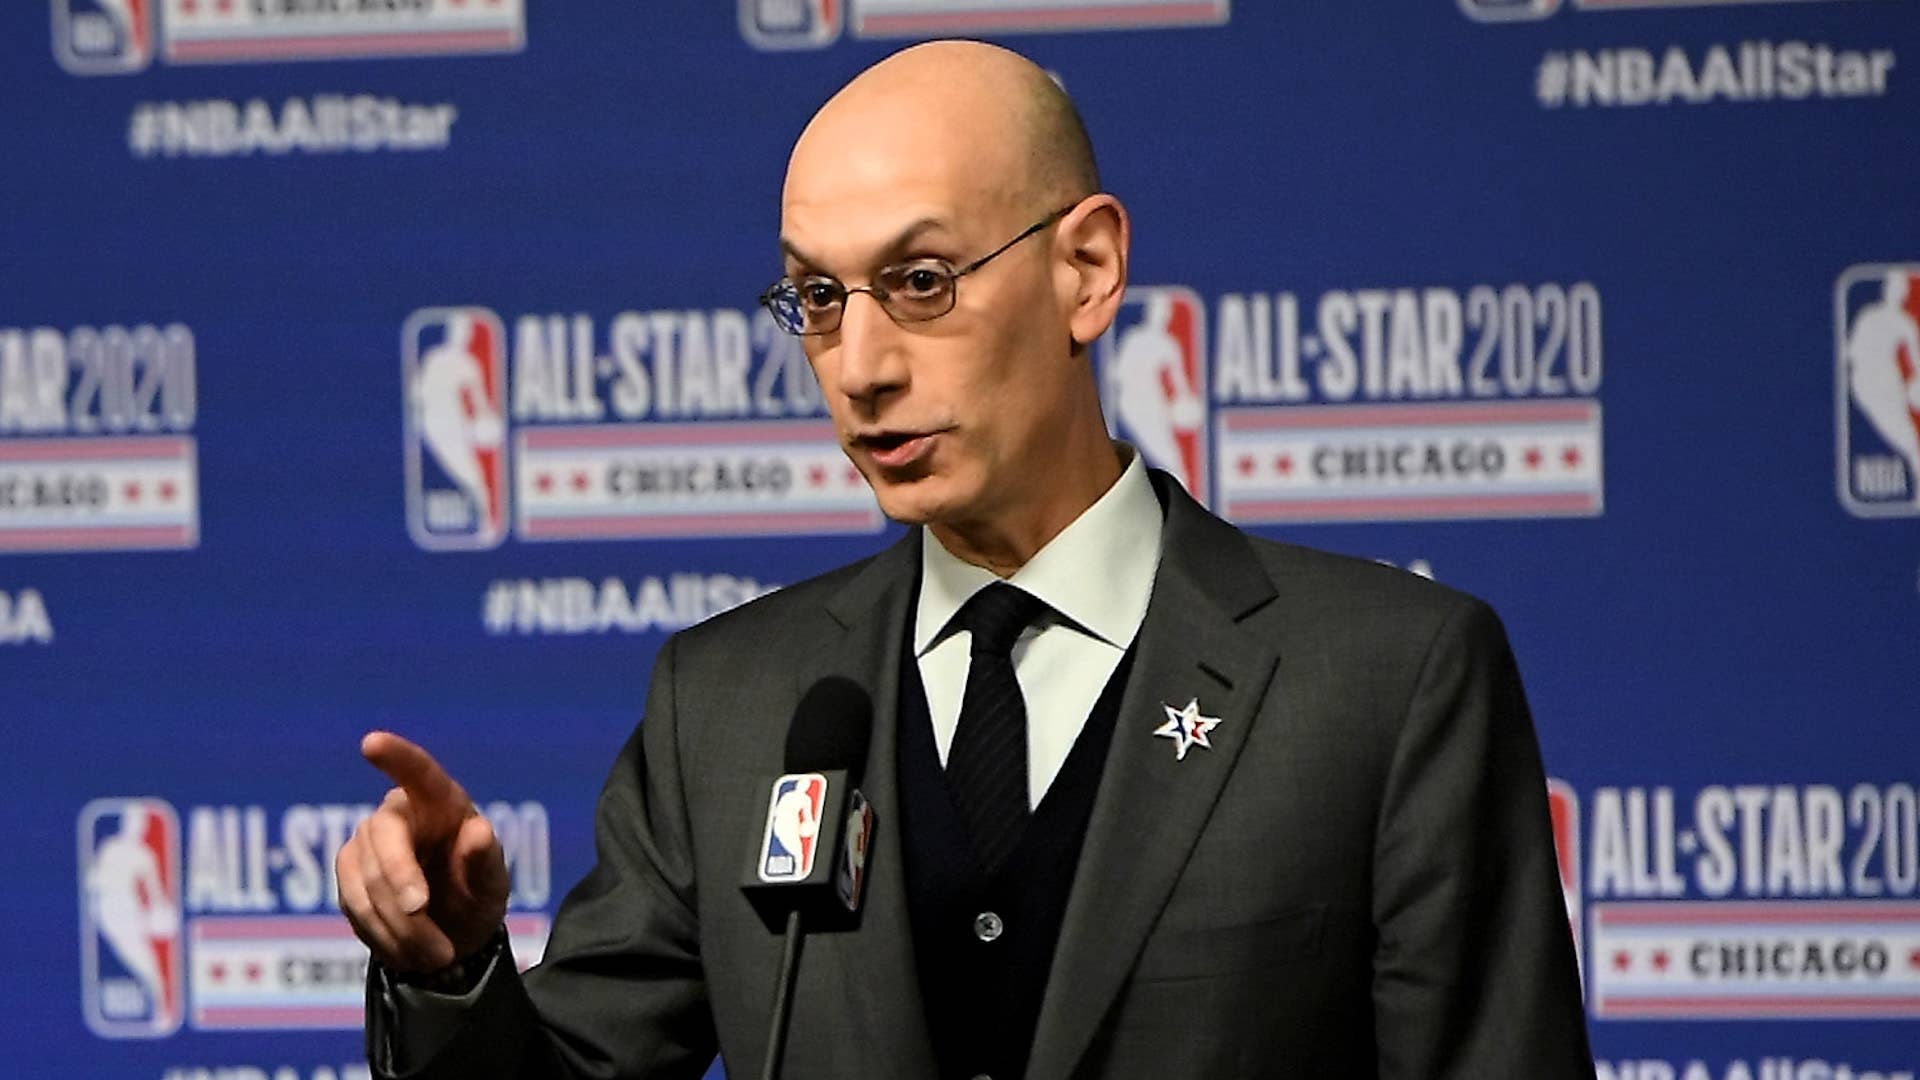 NBA Commissioner Adam Silver speaks to the media during a press conference at the United Center.